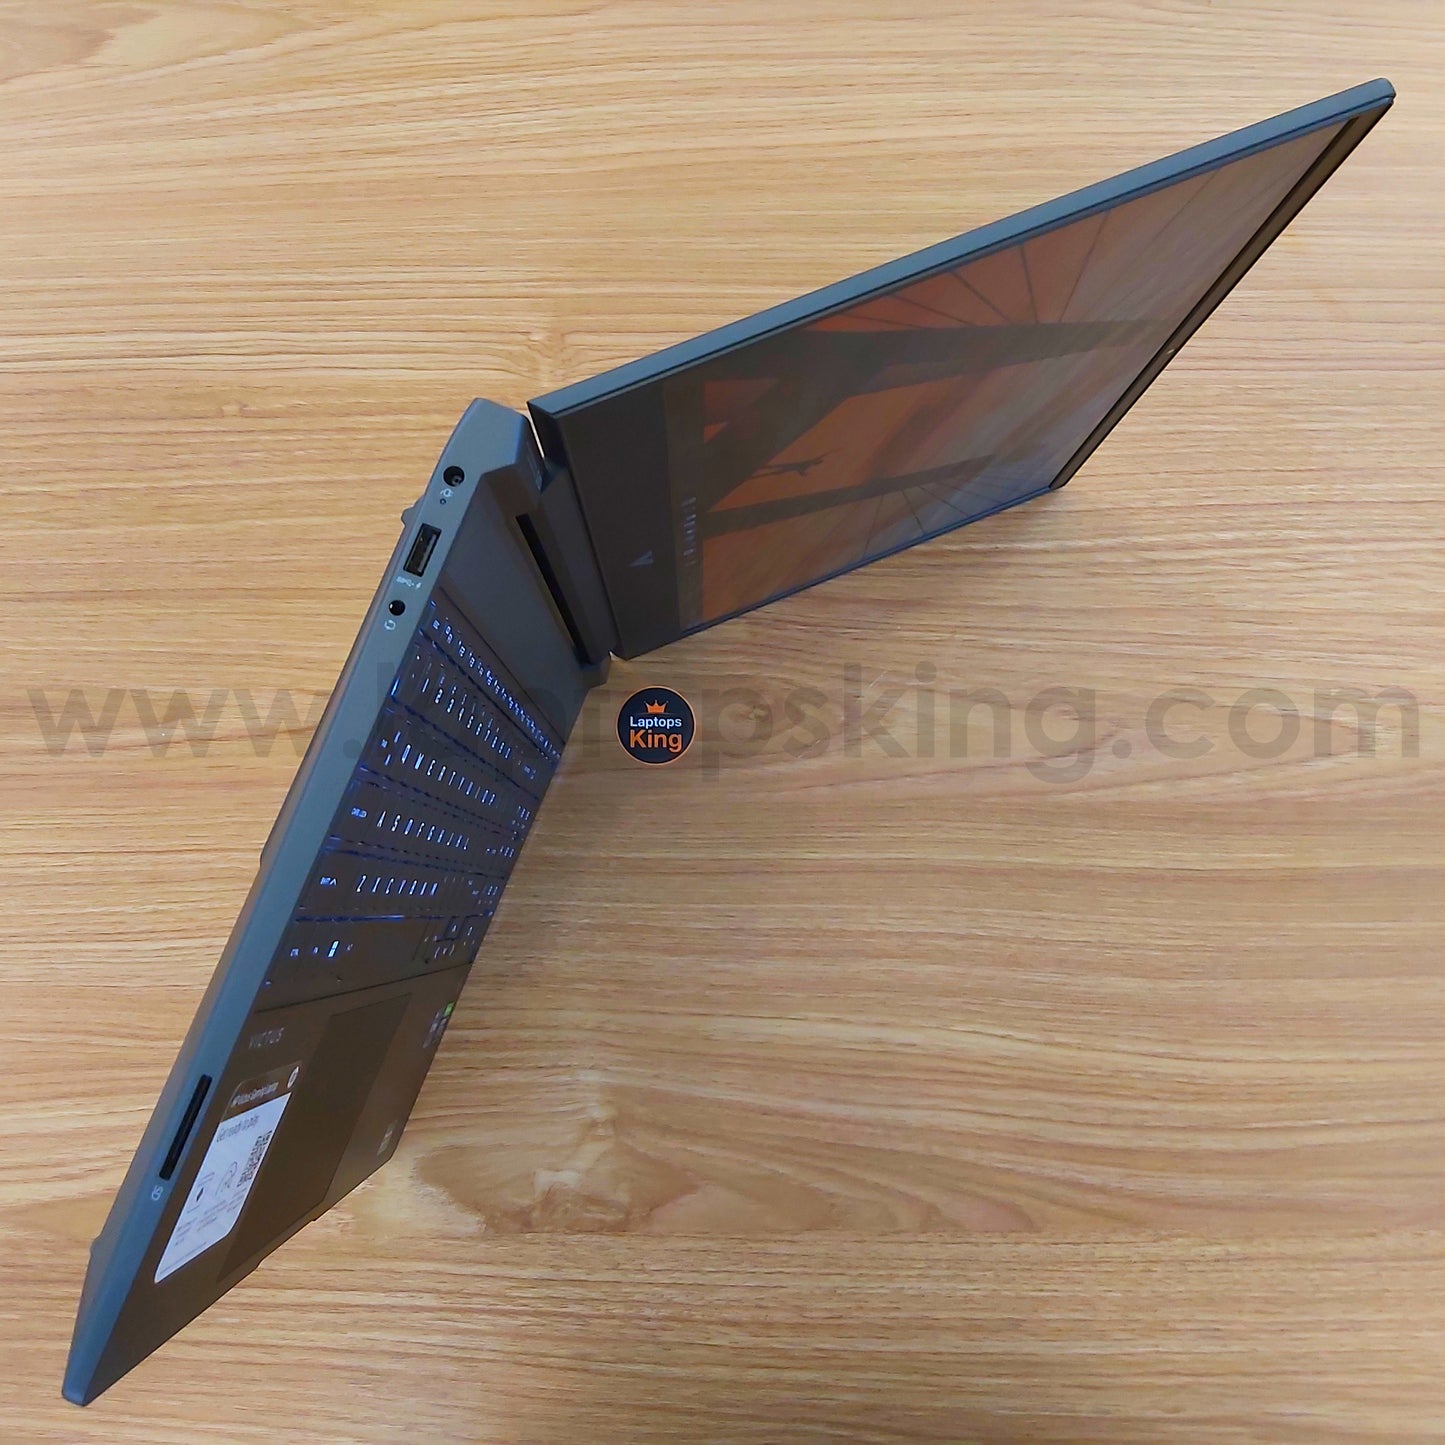 HP Victus 15-Fa0032dx Core i7-12650h Rtx 3050 Ti 144Hz Gaming Laptop Offers (Brand New) Gaming laptop, Graphic Design laptop, best laptop for gaming, best laptop for graphic design, computer for sale Lebanon, laptop for video editing in Lebanon, laptop for sale Lebanon, best graphic design laptop,	best video editing laptop, best programming laptop, laptop for sale in Lebanon, laptops for sale in Lebanon, laptop for sale in Lebanon, buy computer Lebanon, buy laptop Lebanon.